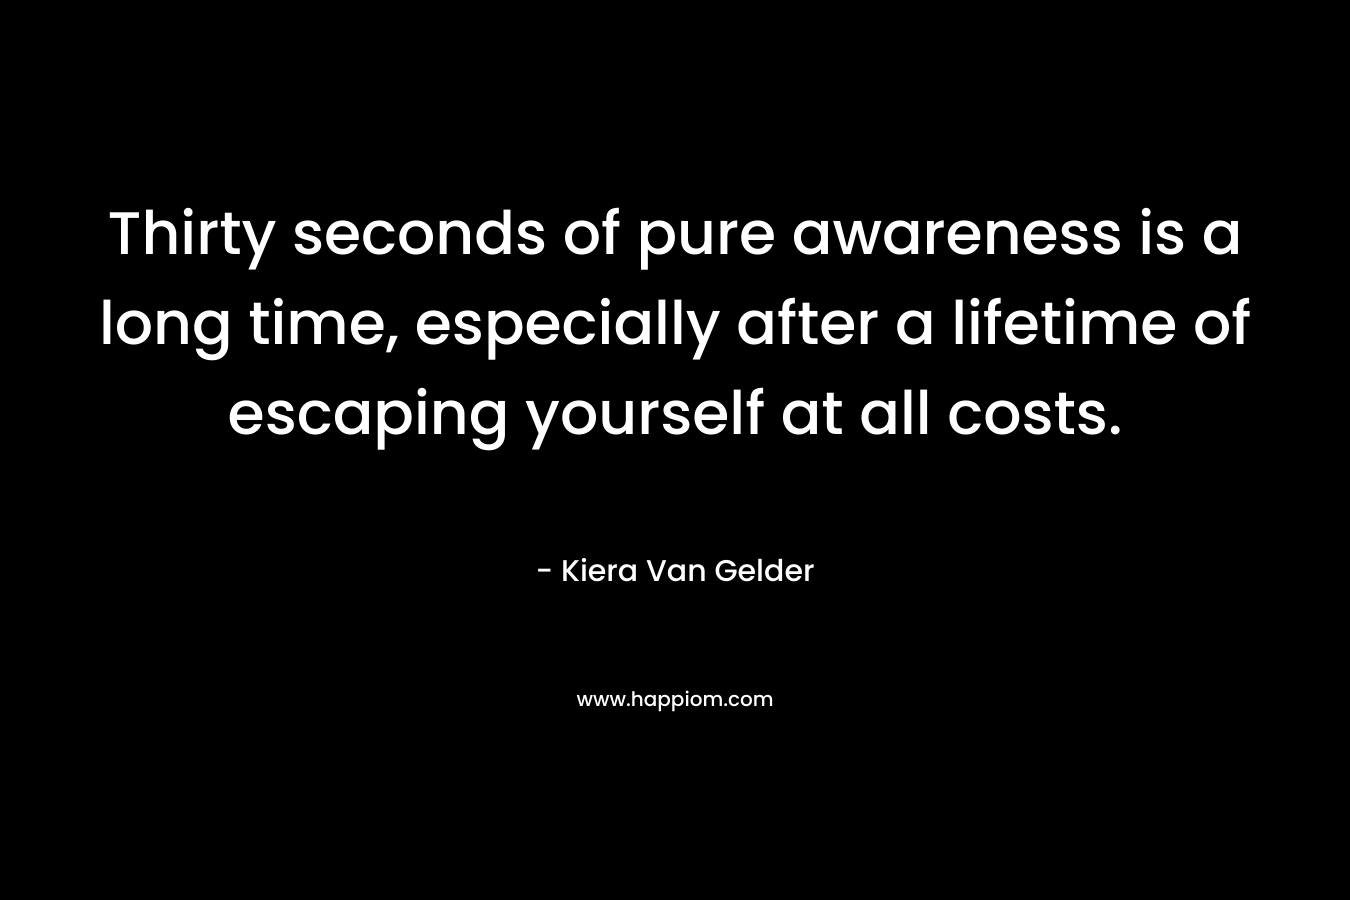 Thirty seconds of pure awareness is a long time, especially after a lifetime of escaping yourself at all costs. – Kiera Van Gelder